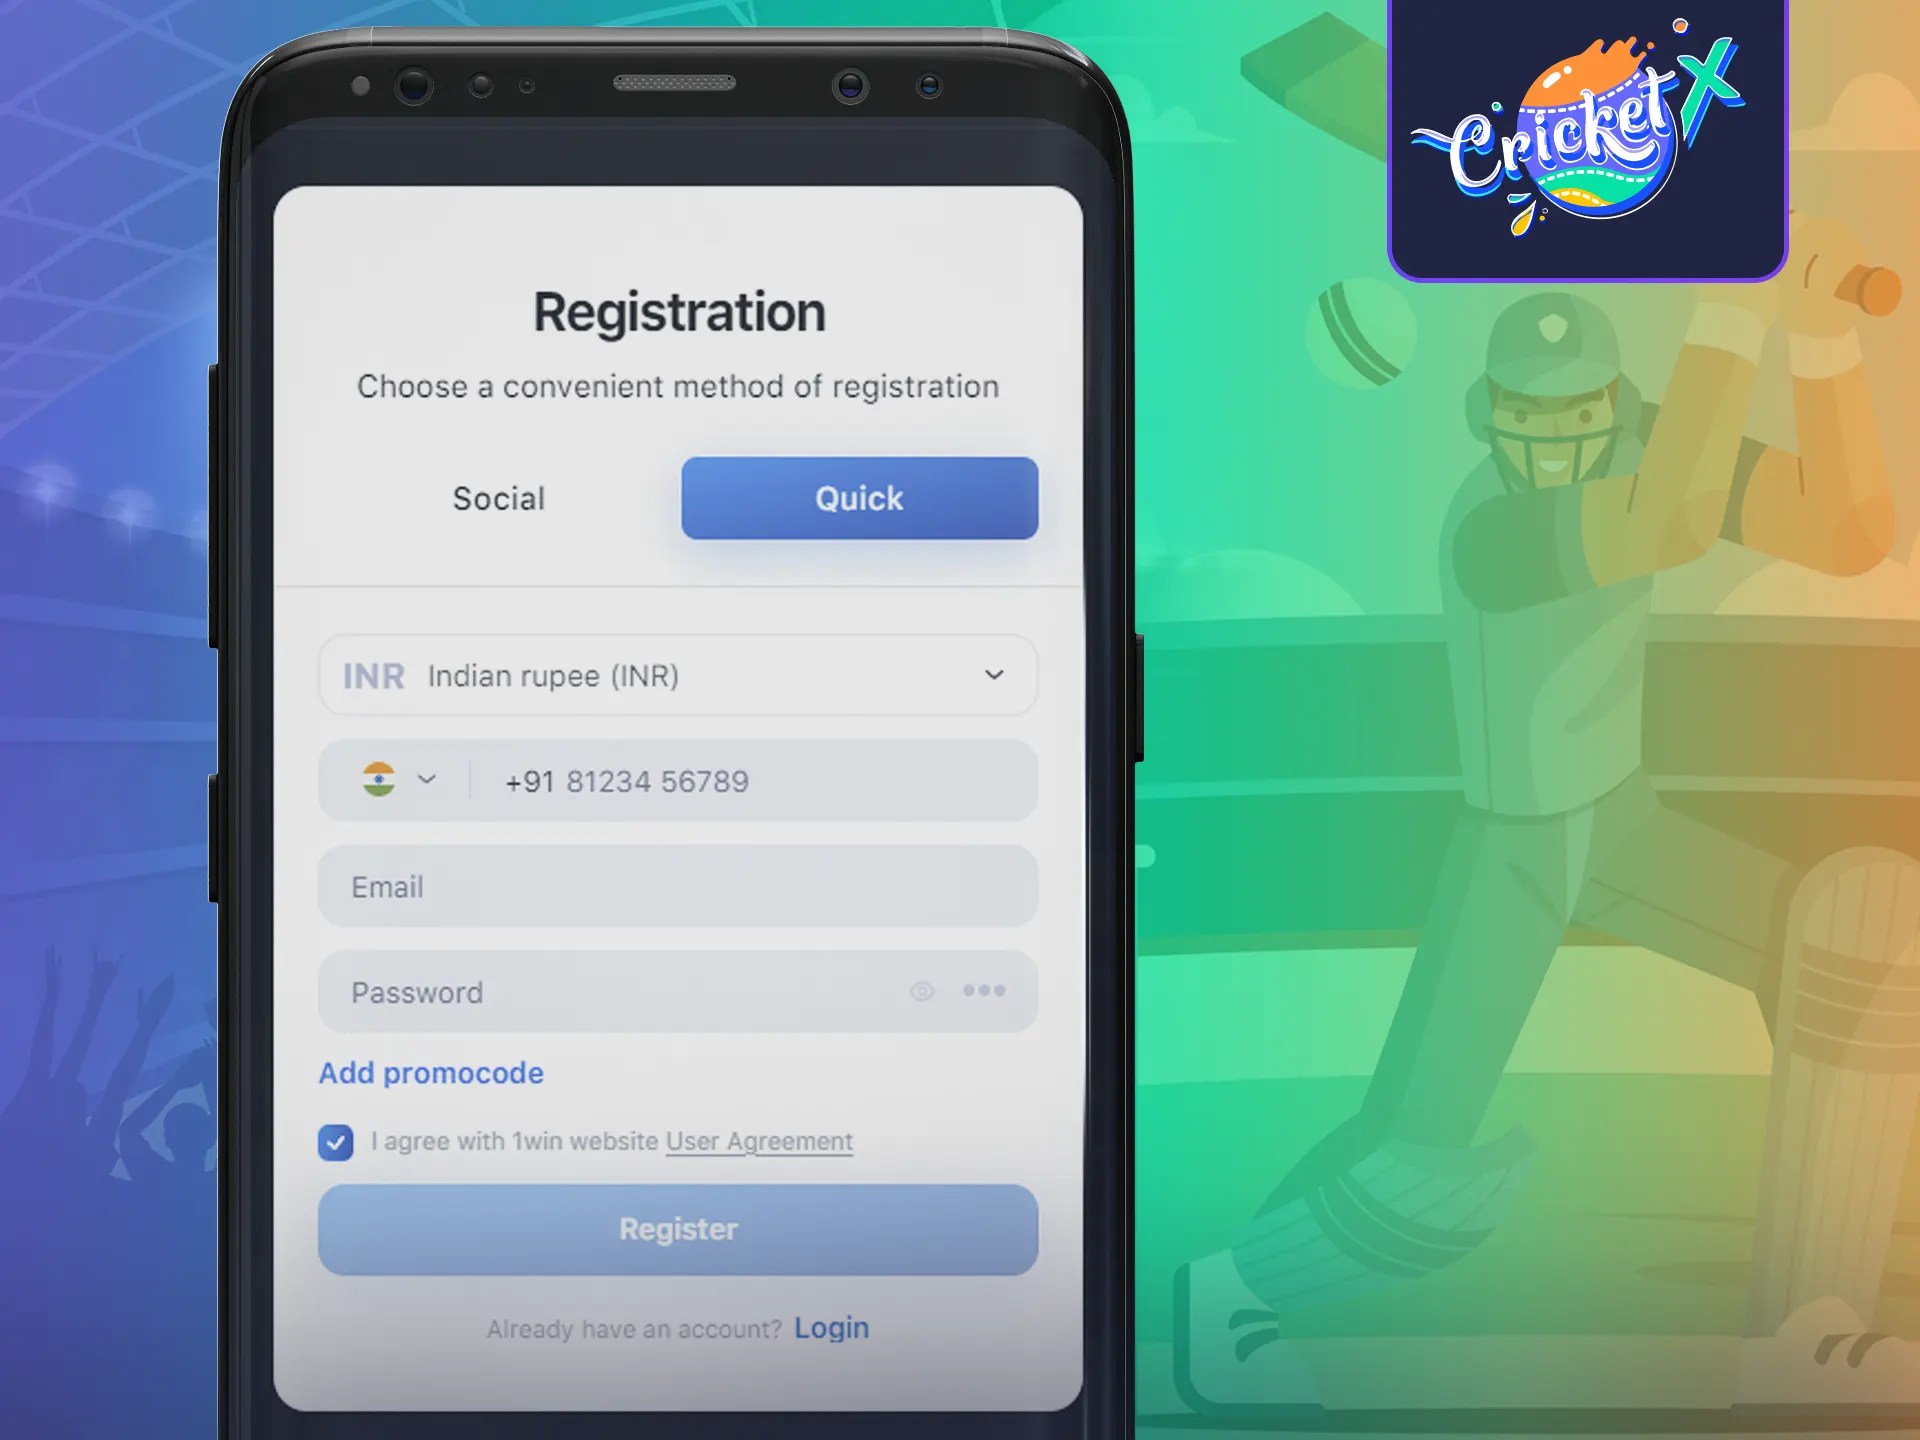 Learn how to register through mobile app to start playing CricketX.